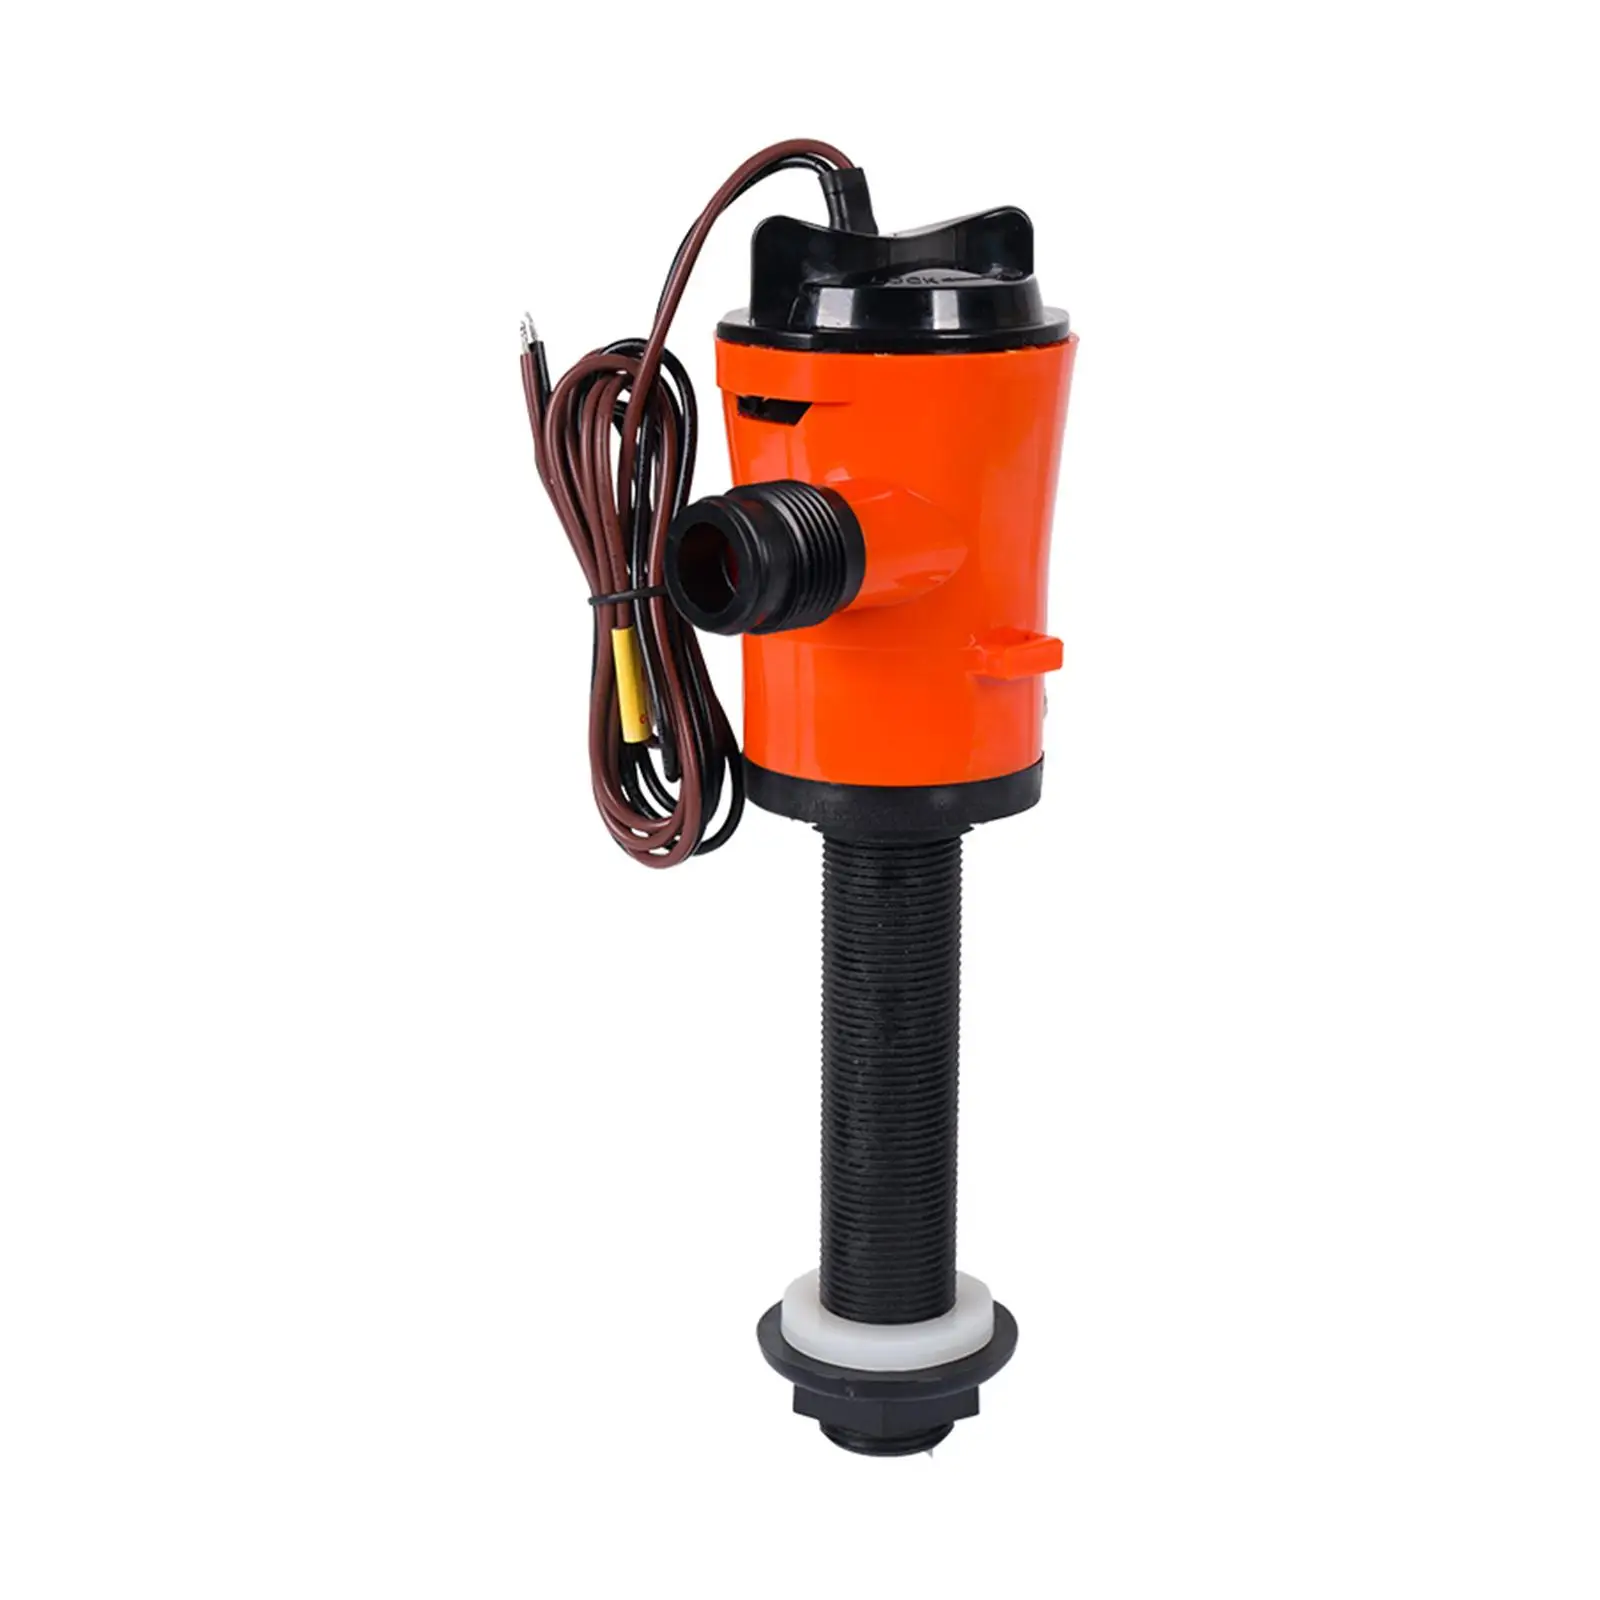 Livewell Pump for Boat Easy to Install Assembly Professional Boat Bilge Pump